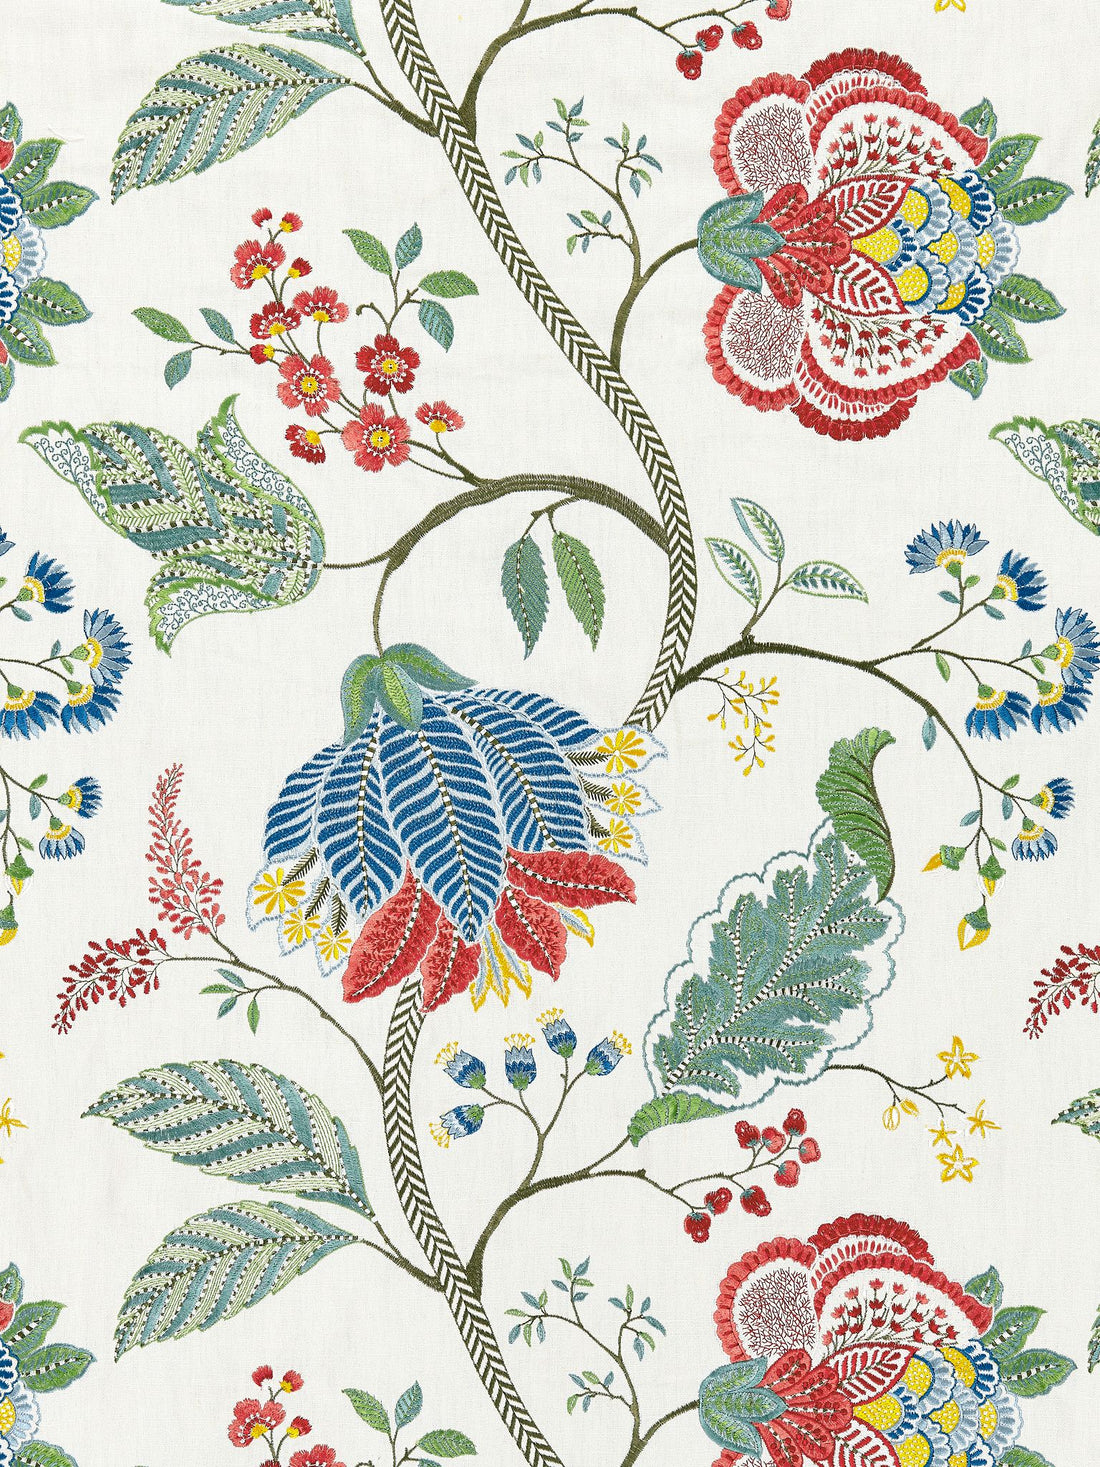 Palampore Embroidery fabric in bloom color - pattern number SC 000327175 - by Scalamandre in the Scalamandre Fabrics Book 1 collection